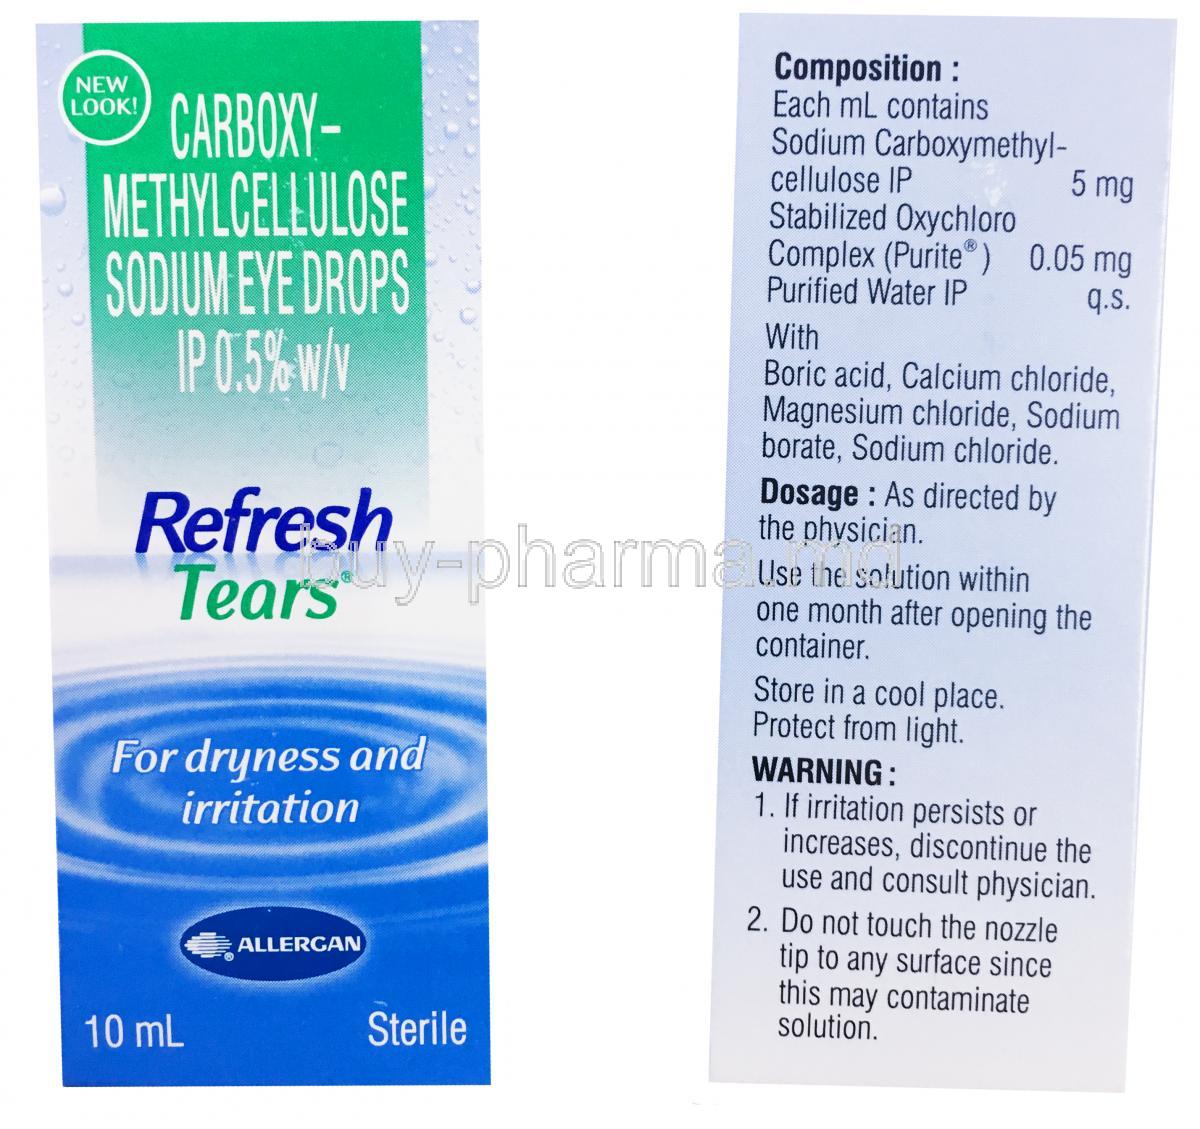 Carboxy methyl cellulose Sodium, Ophthalmic Solution Eye Drops, 0.5% 10ml, box front and back presentation